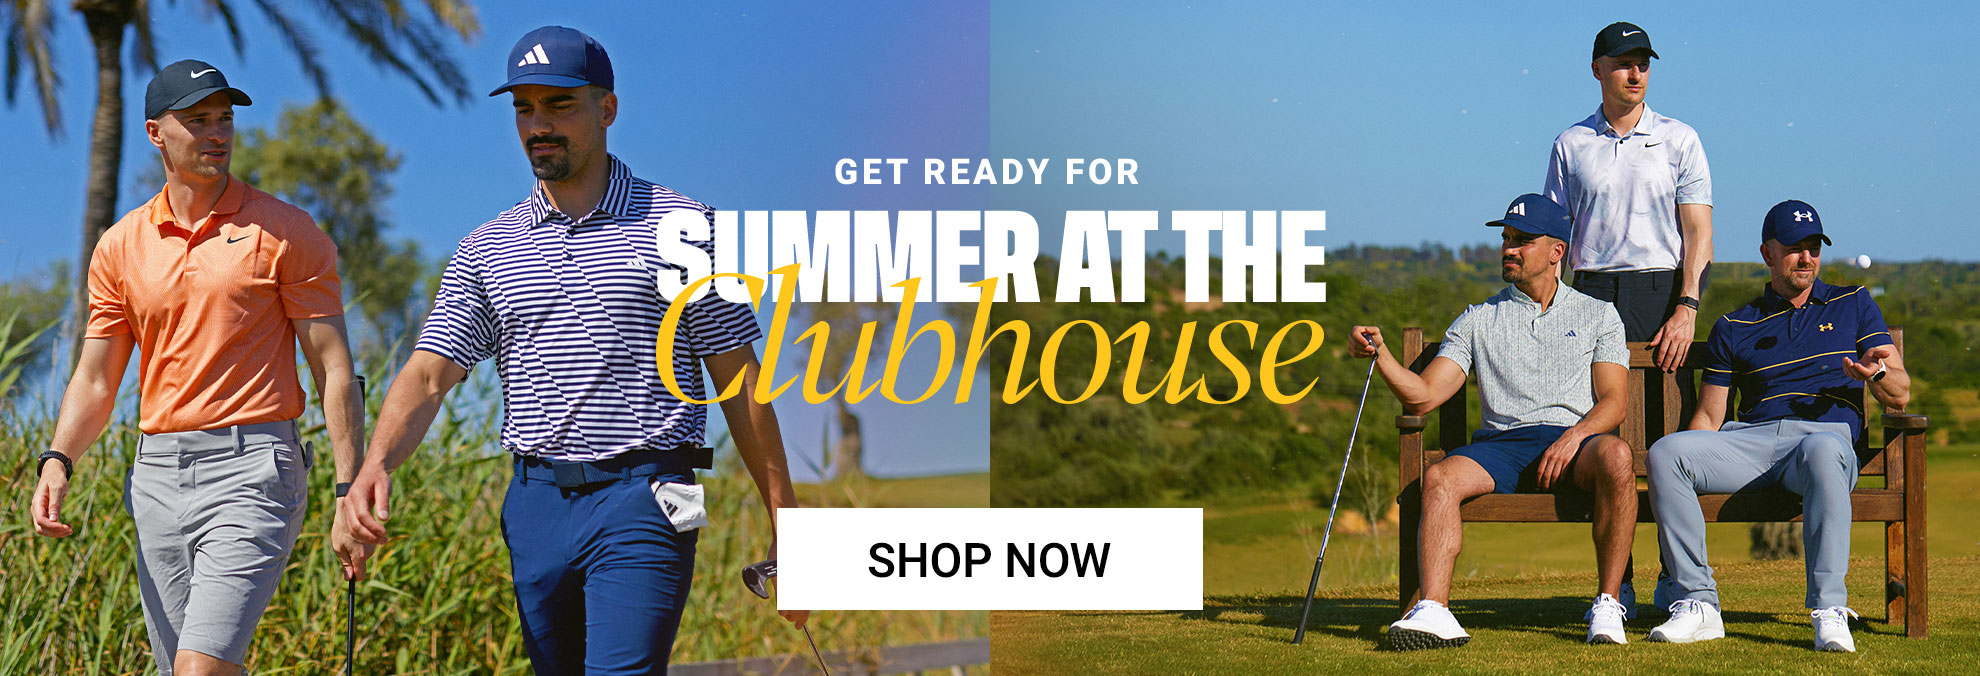 Get Ready For Summer At The Clubhouse